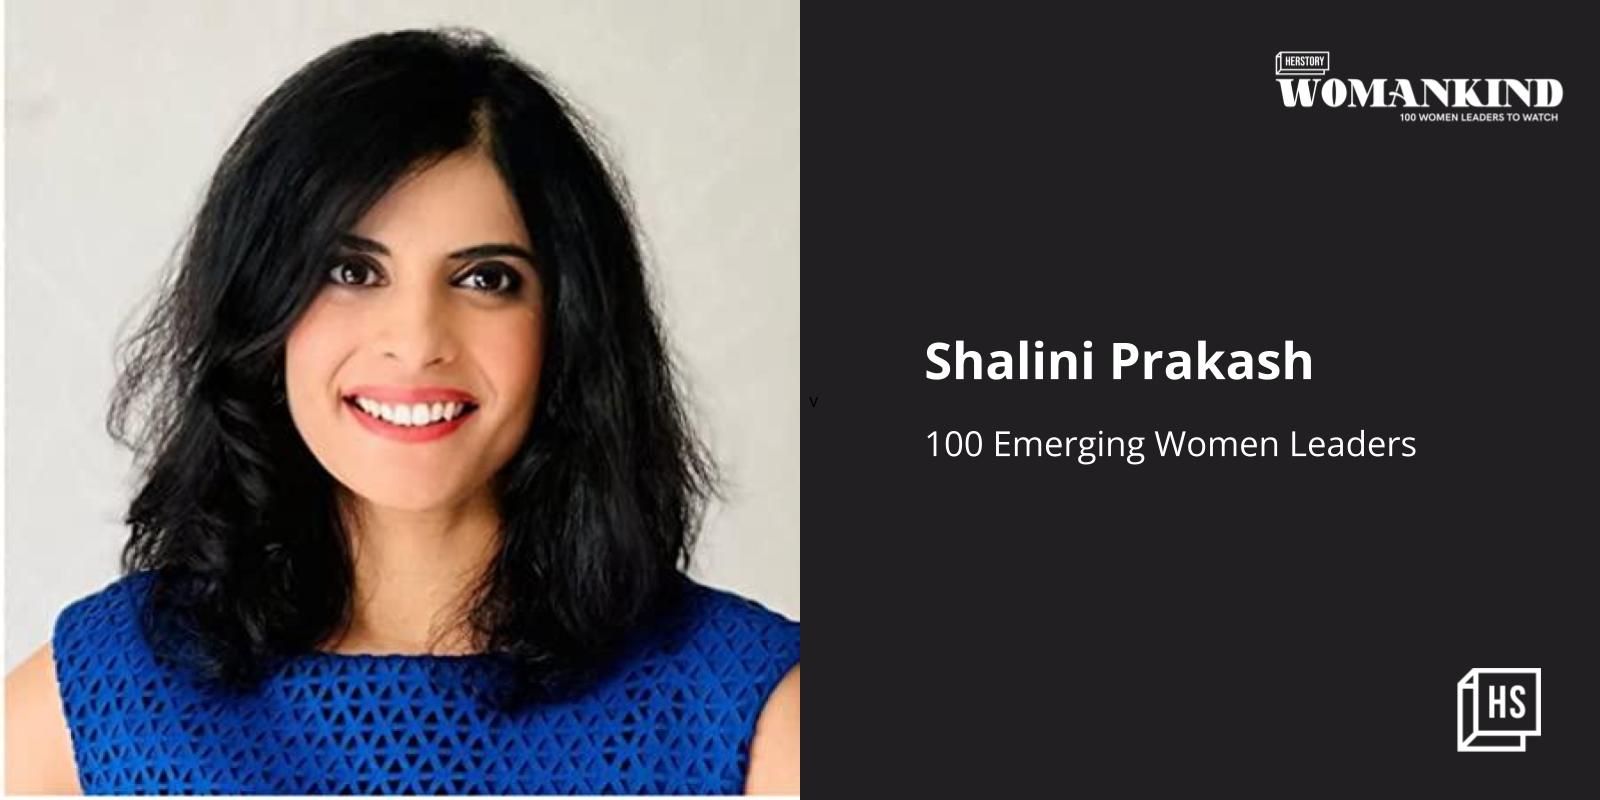 [100 Emerging Women Leaders] From a VC investor to turning author: The story of Shalini Prakash

